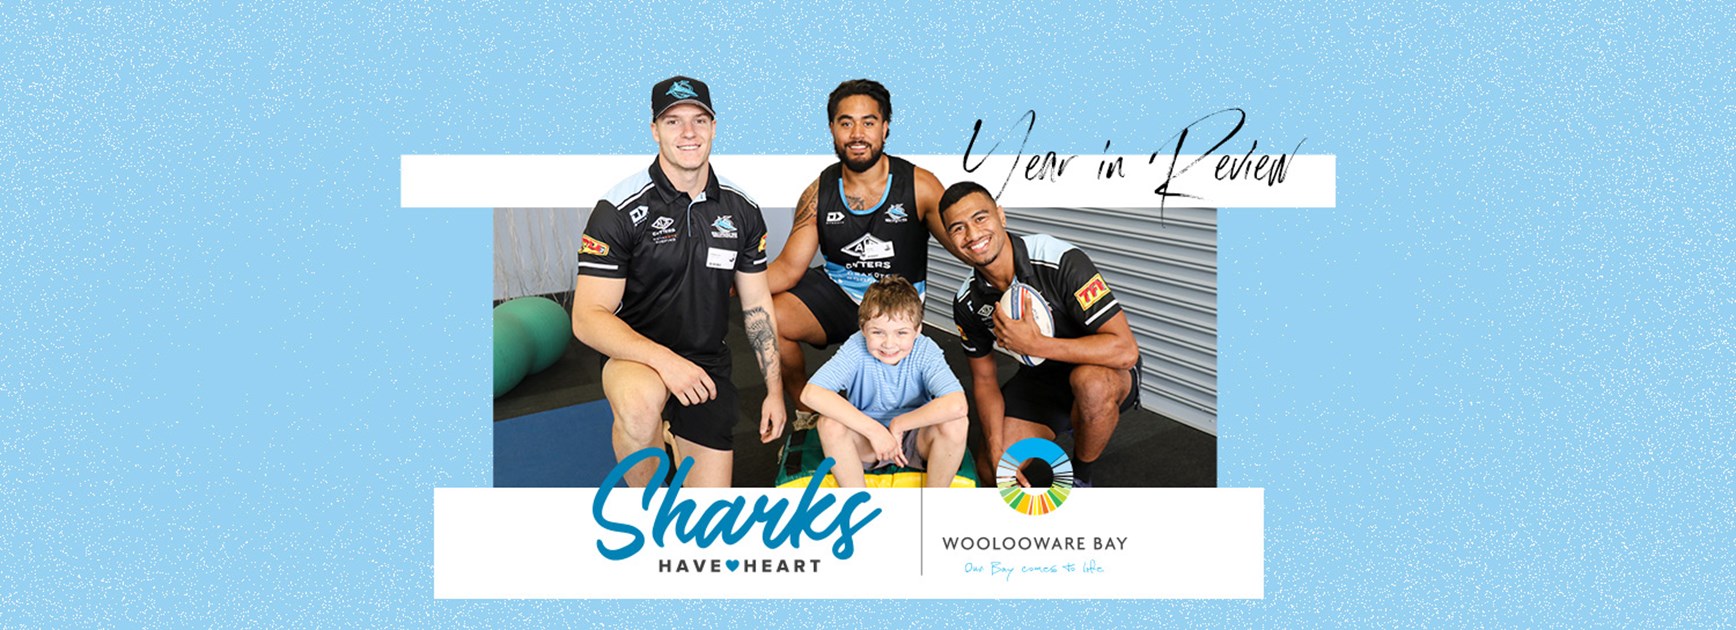 2020 Sharks Have Heart Yearly Report